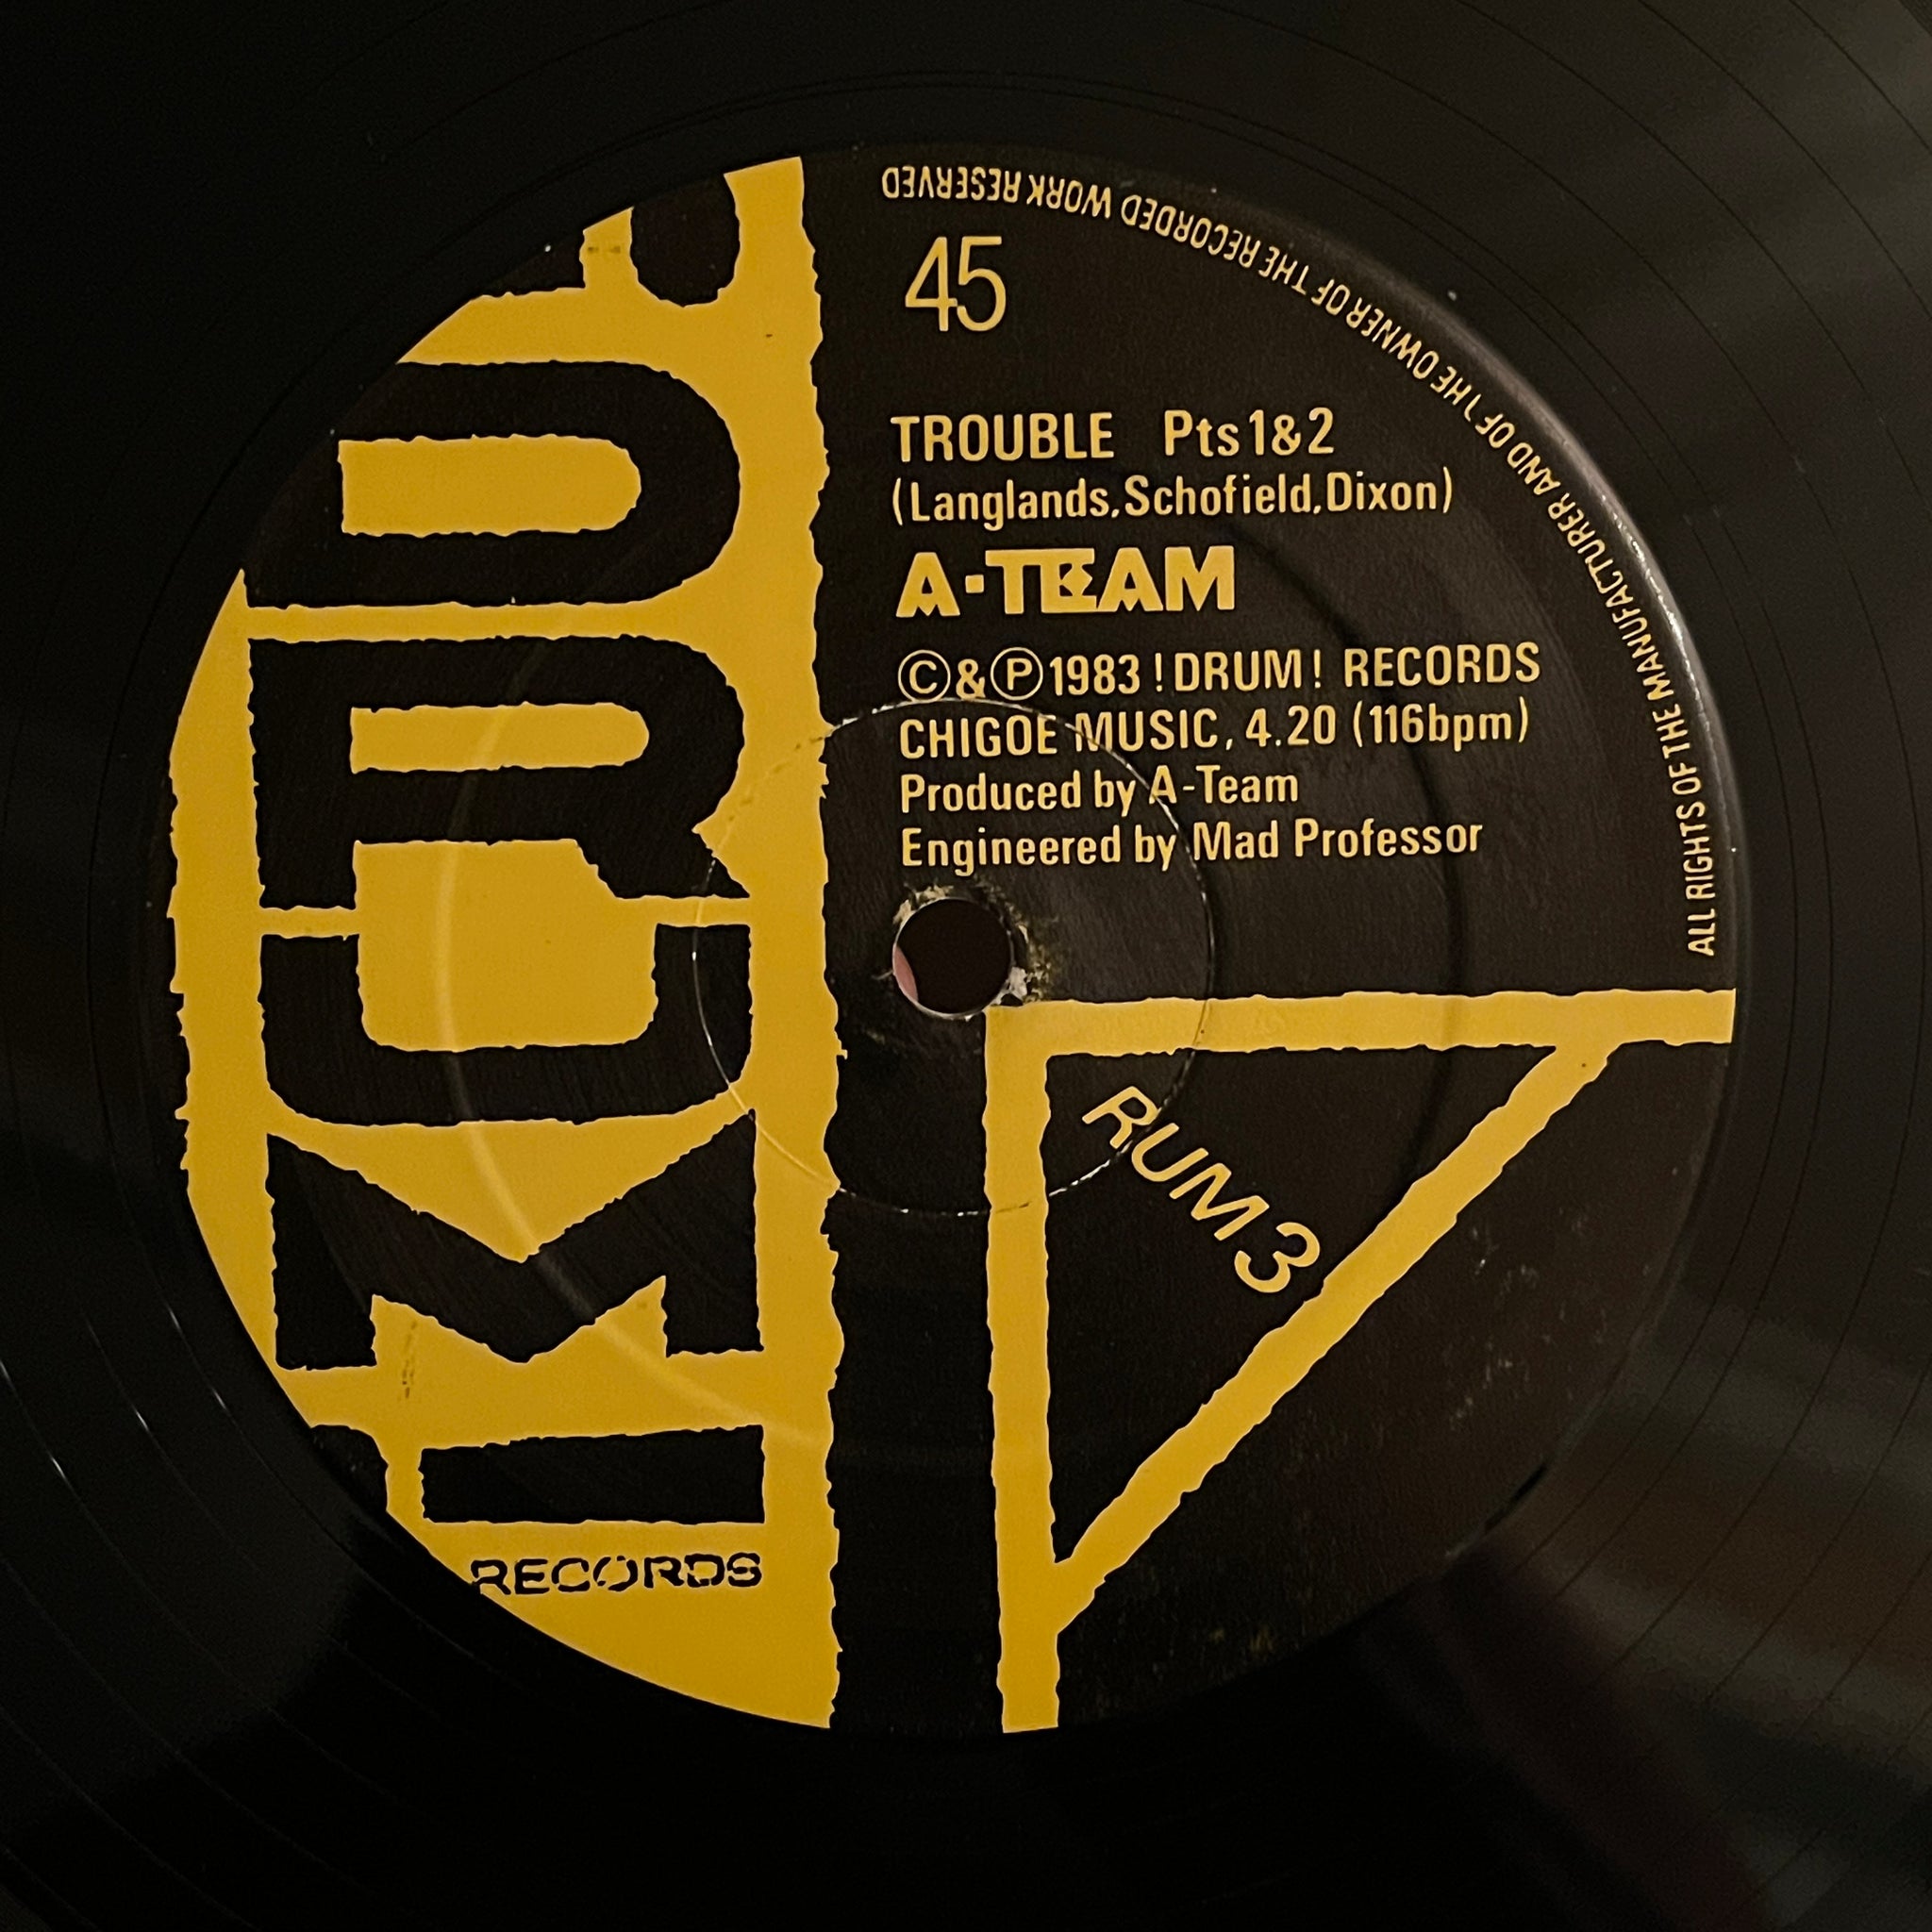 A-Team – Trouble